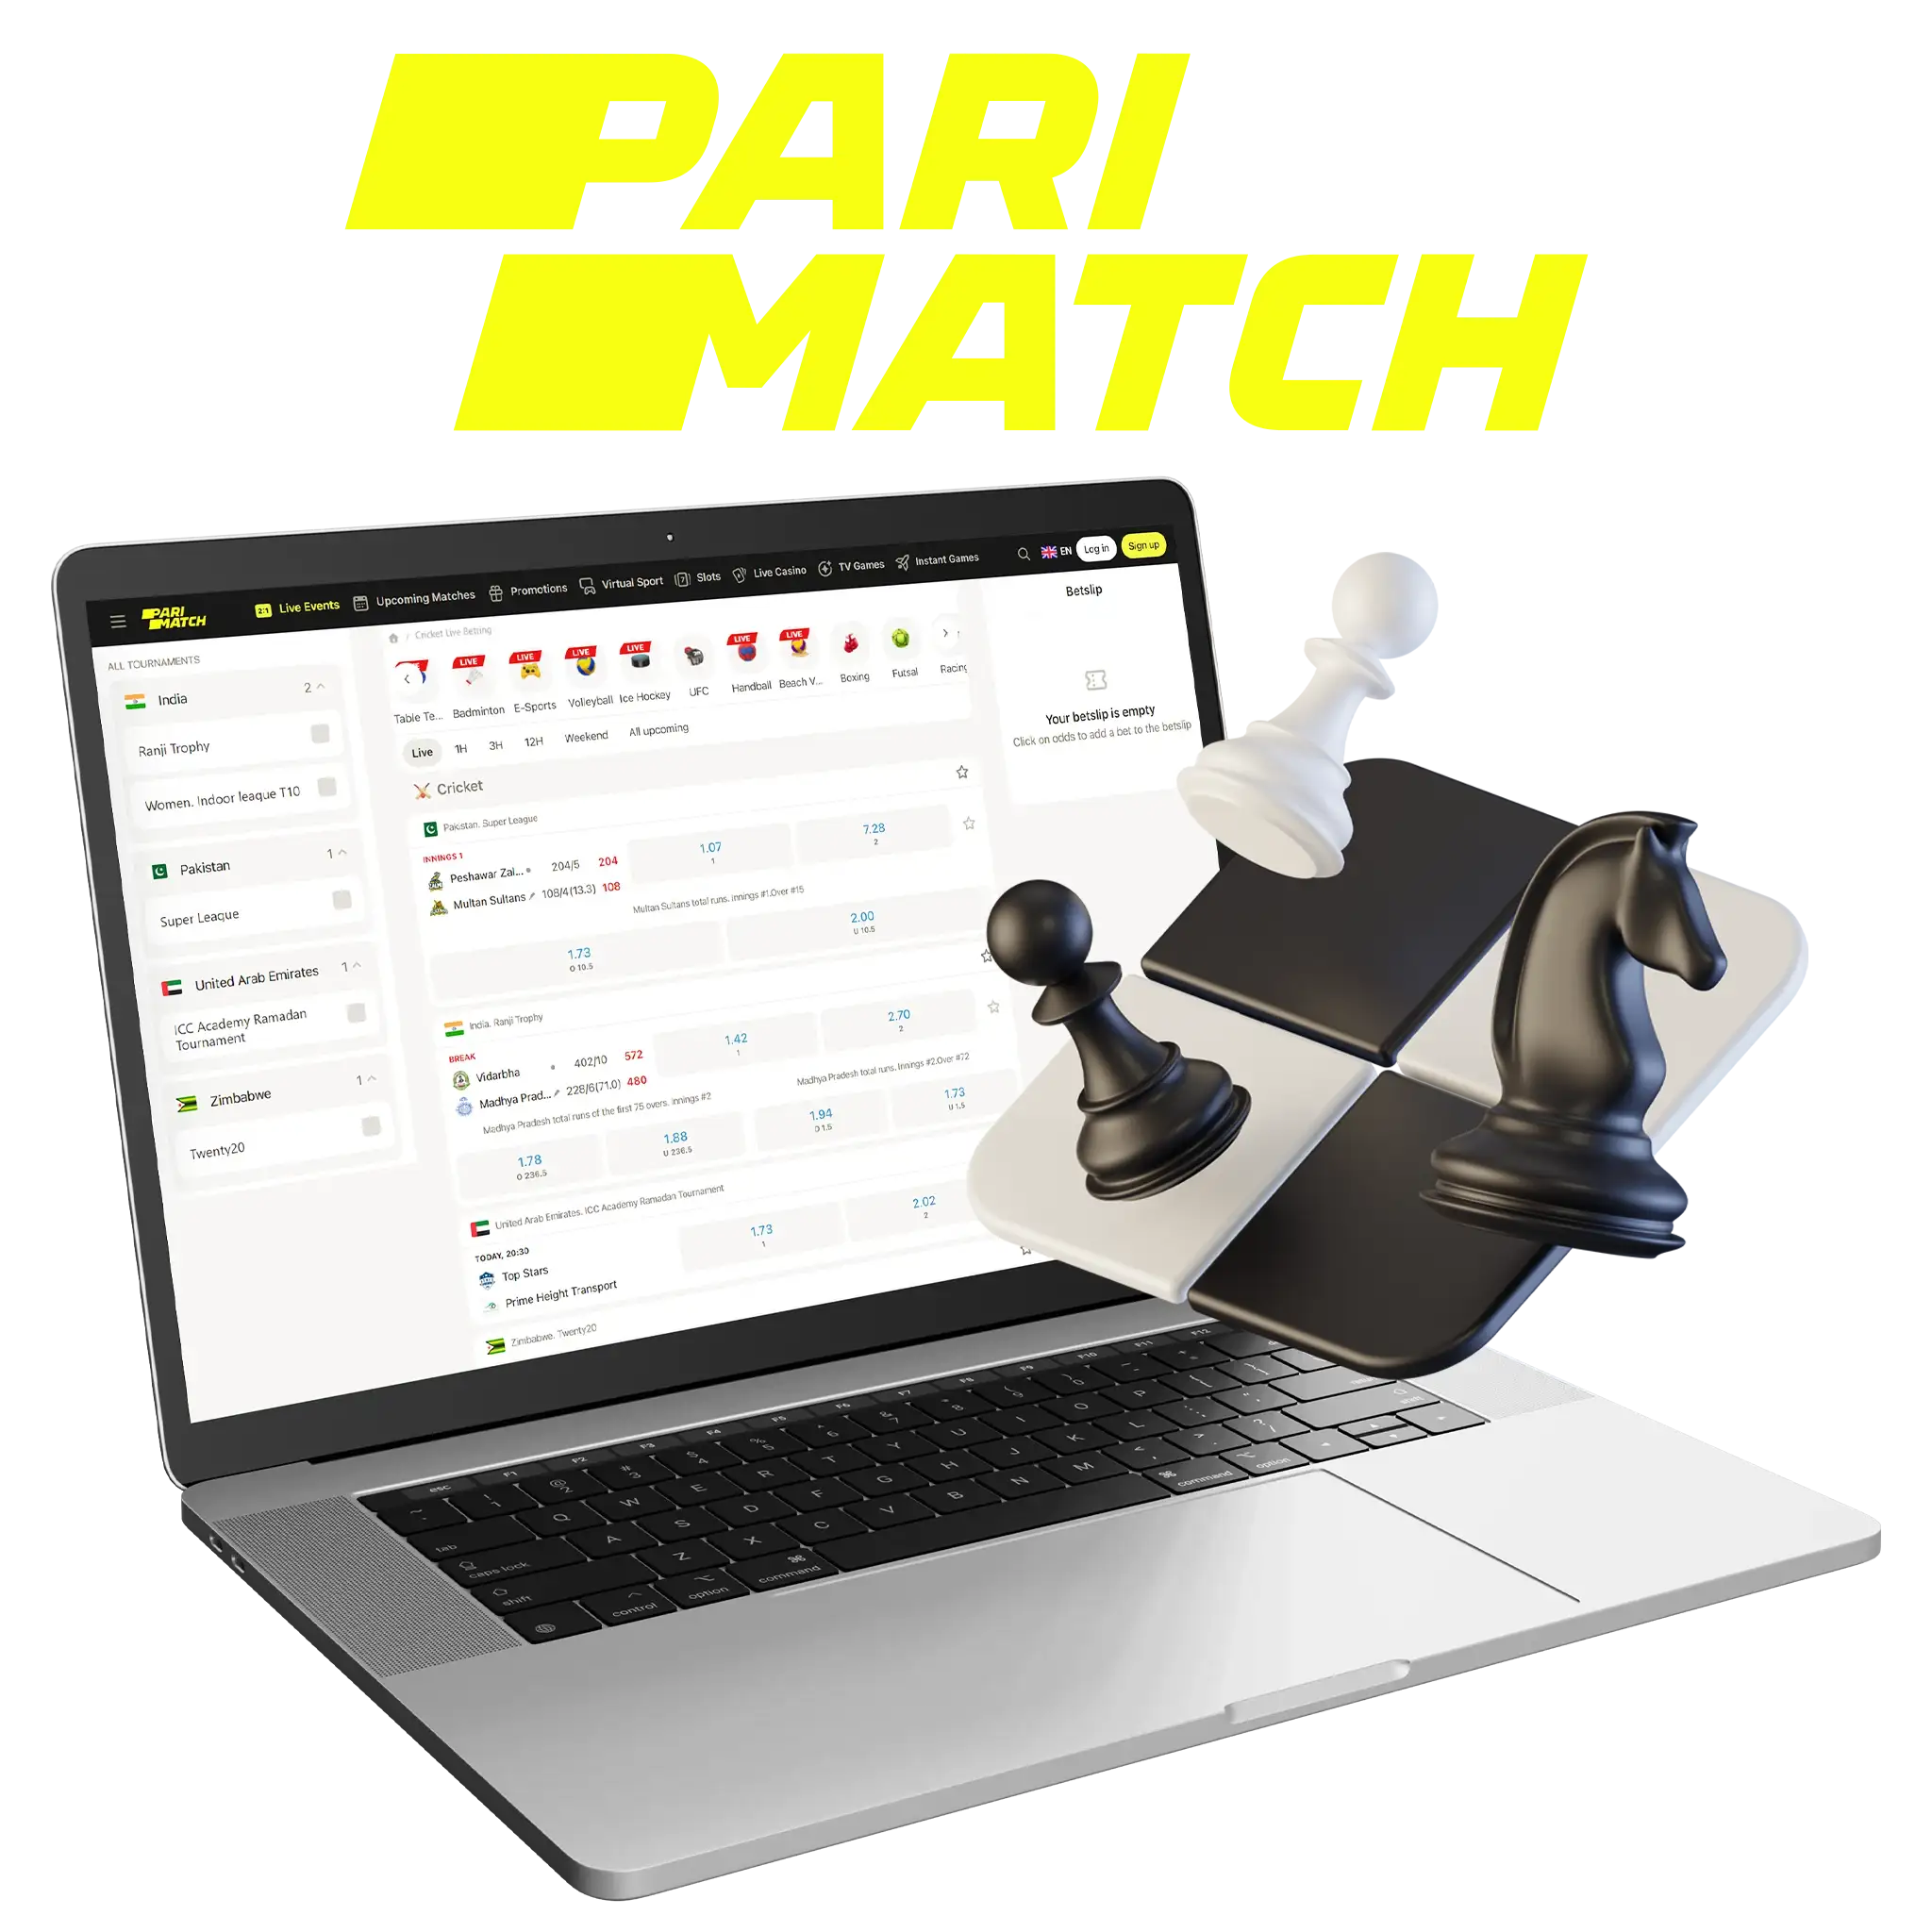 Parimatch is the website for online chess betting and gambling.